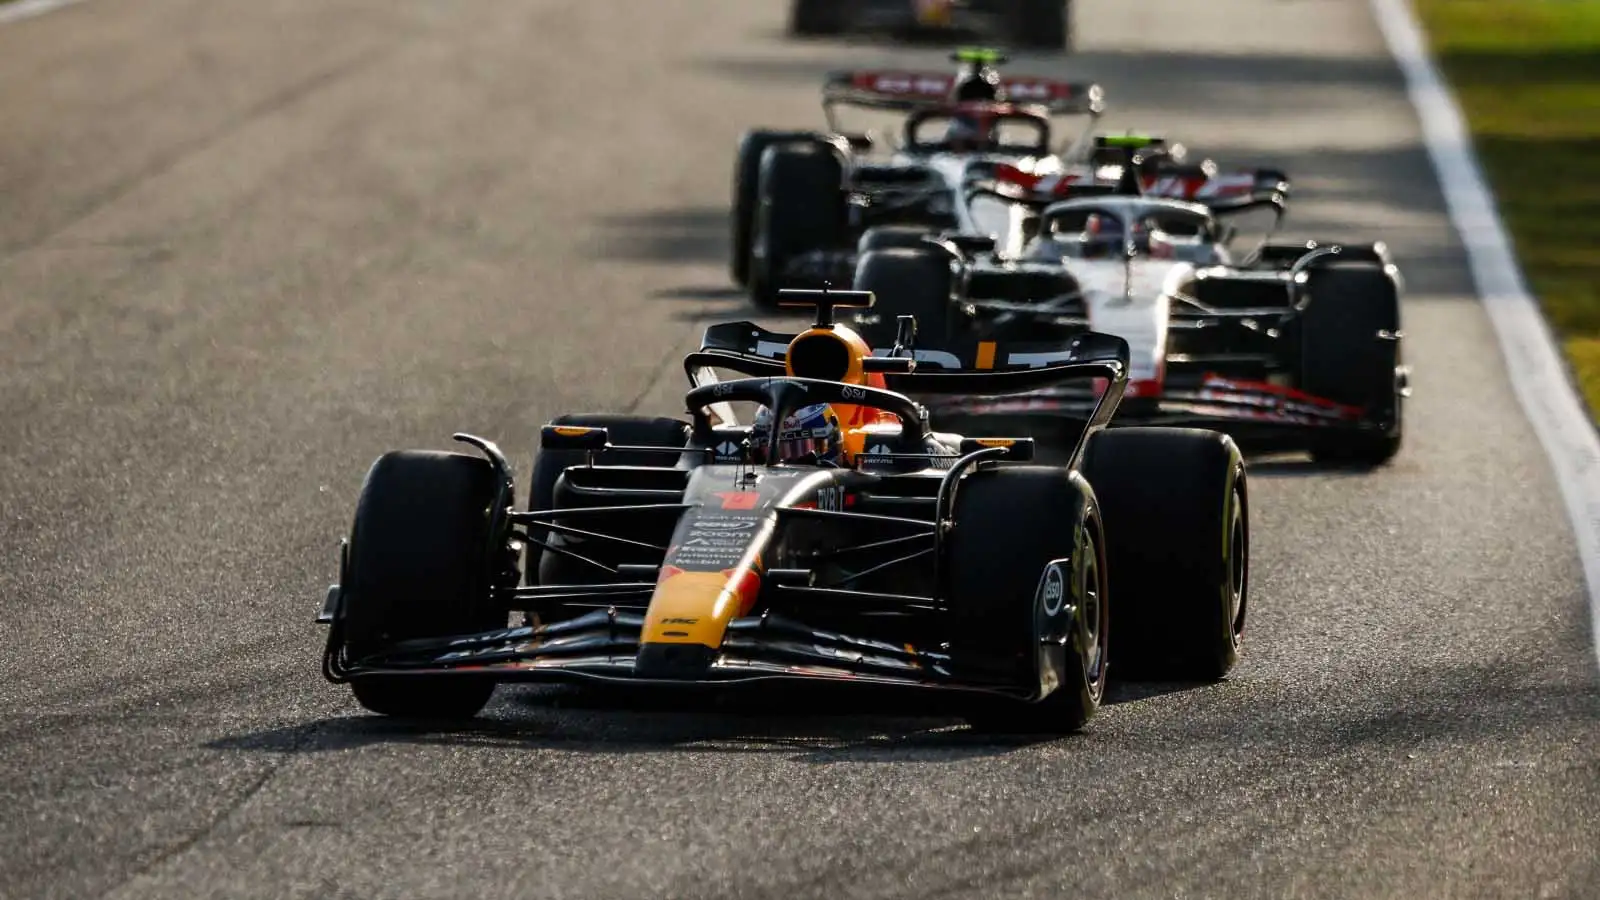 Max Verstappen leads a train of F1 cars at Monza.